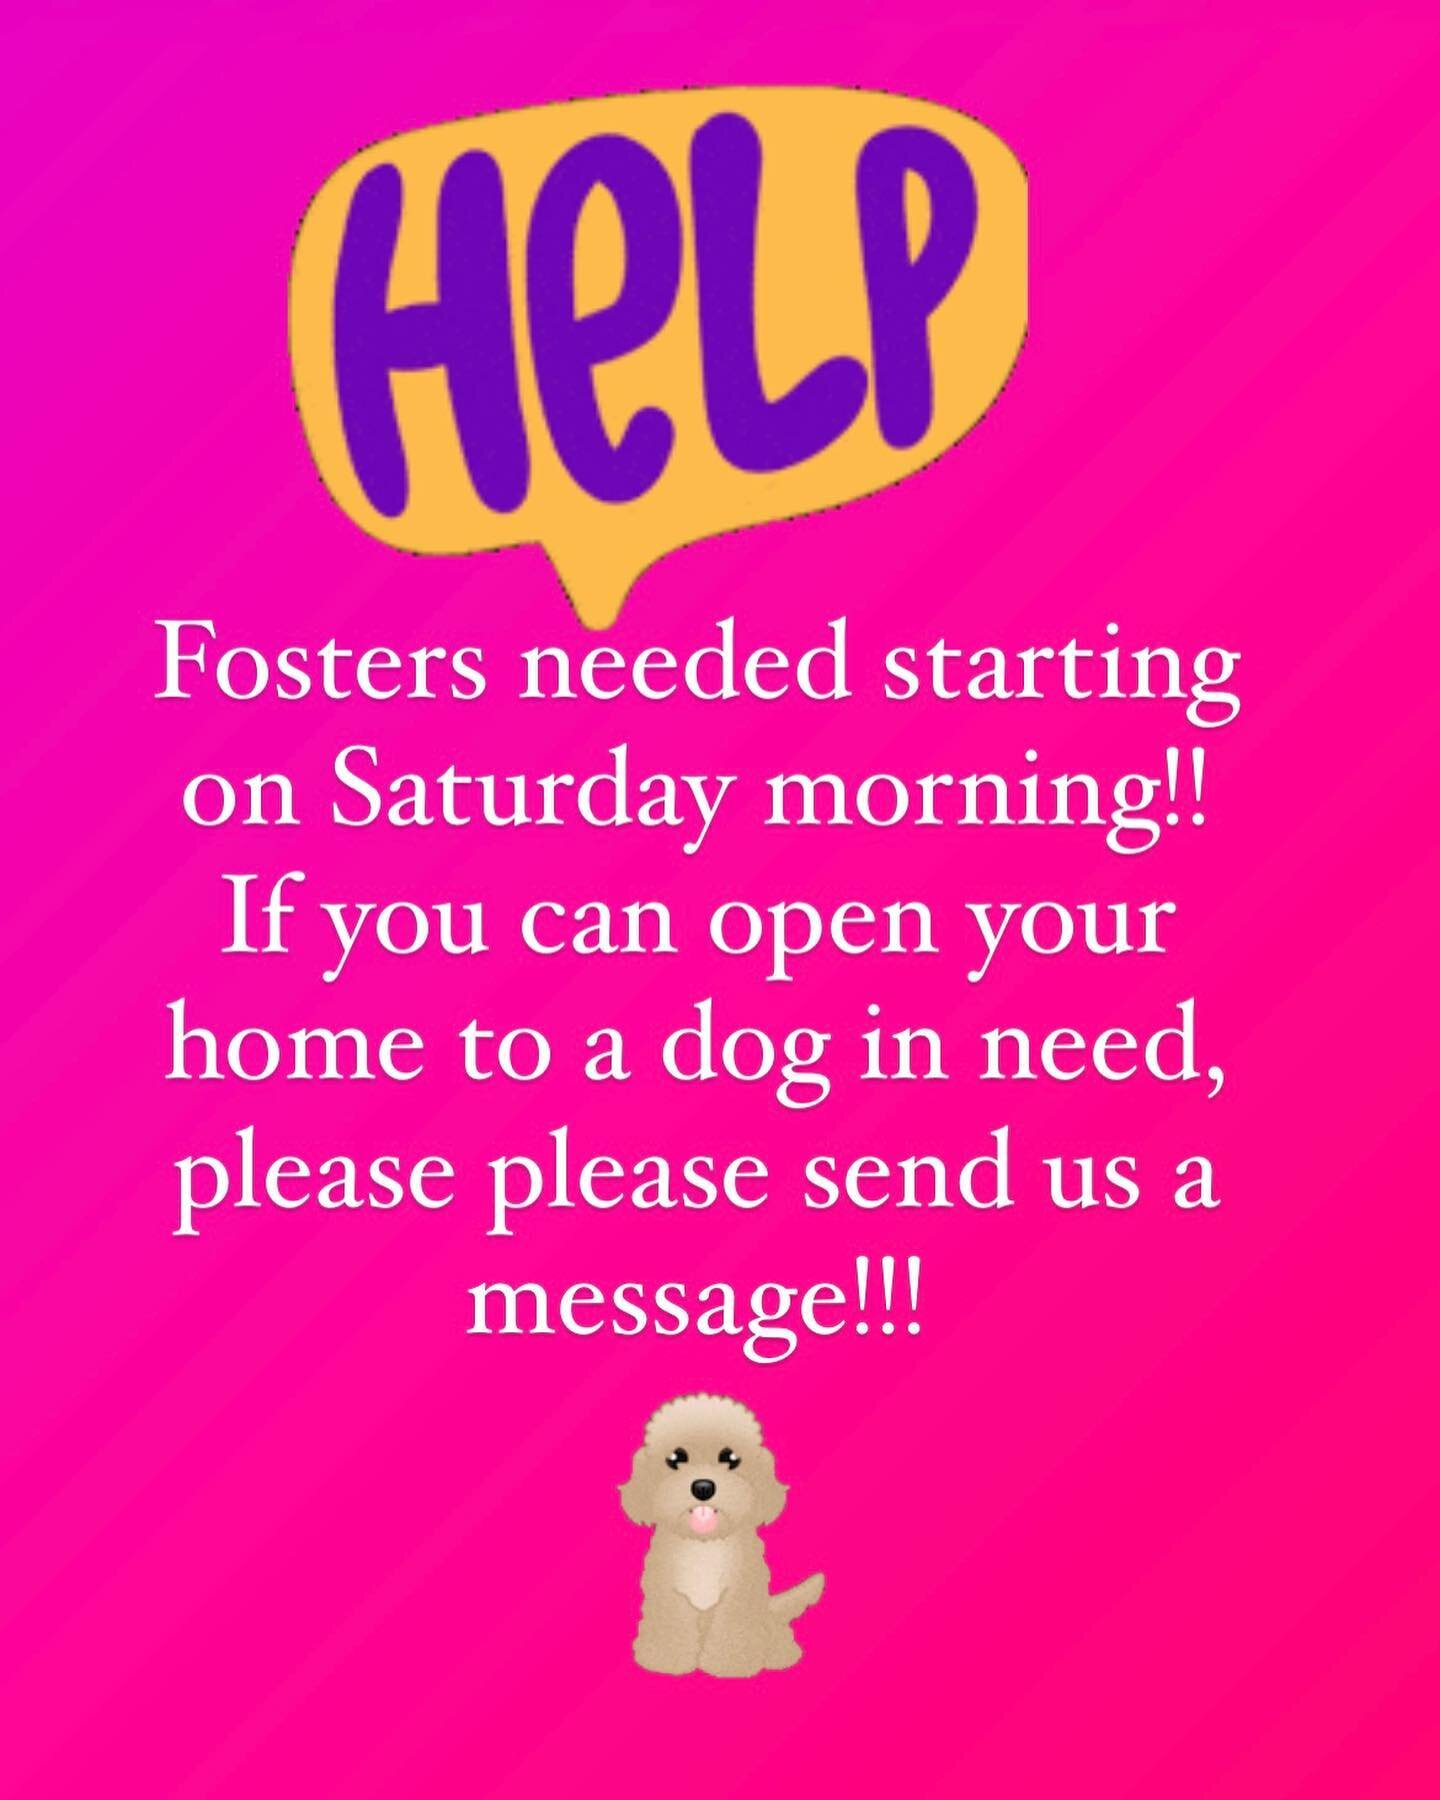 Attention foster families! 

If you can help a small or medium dog or puppy starting on Saturday, please reach out to us via DM or email Fosters.truenorthrescue@gmail.
com! 

Dogs need your help!